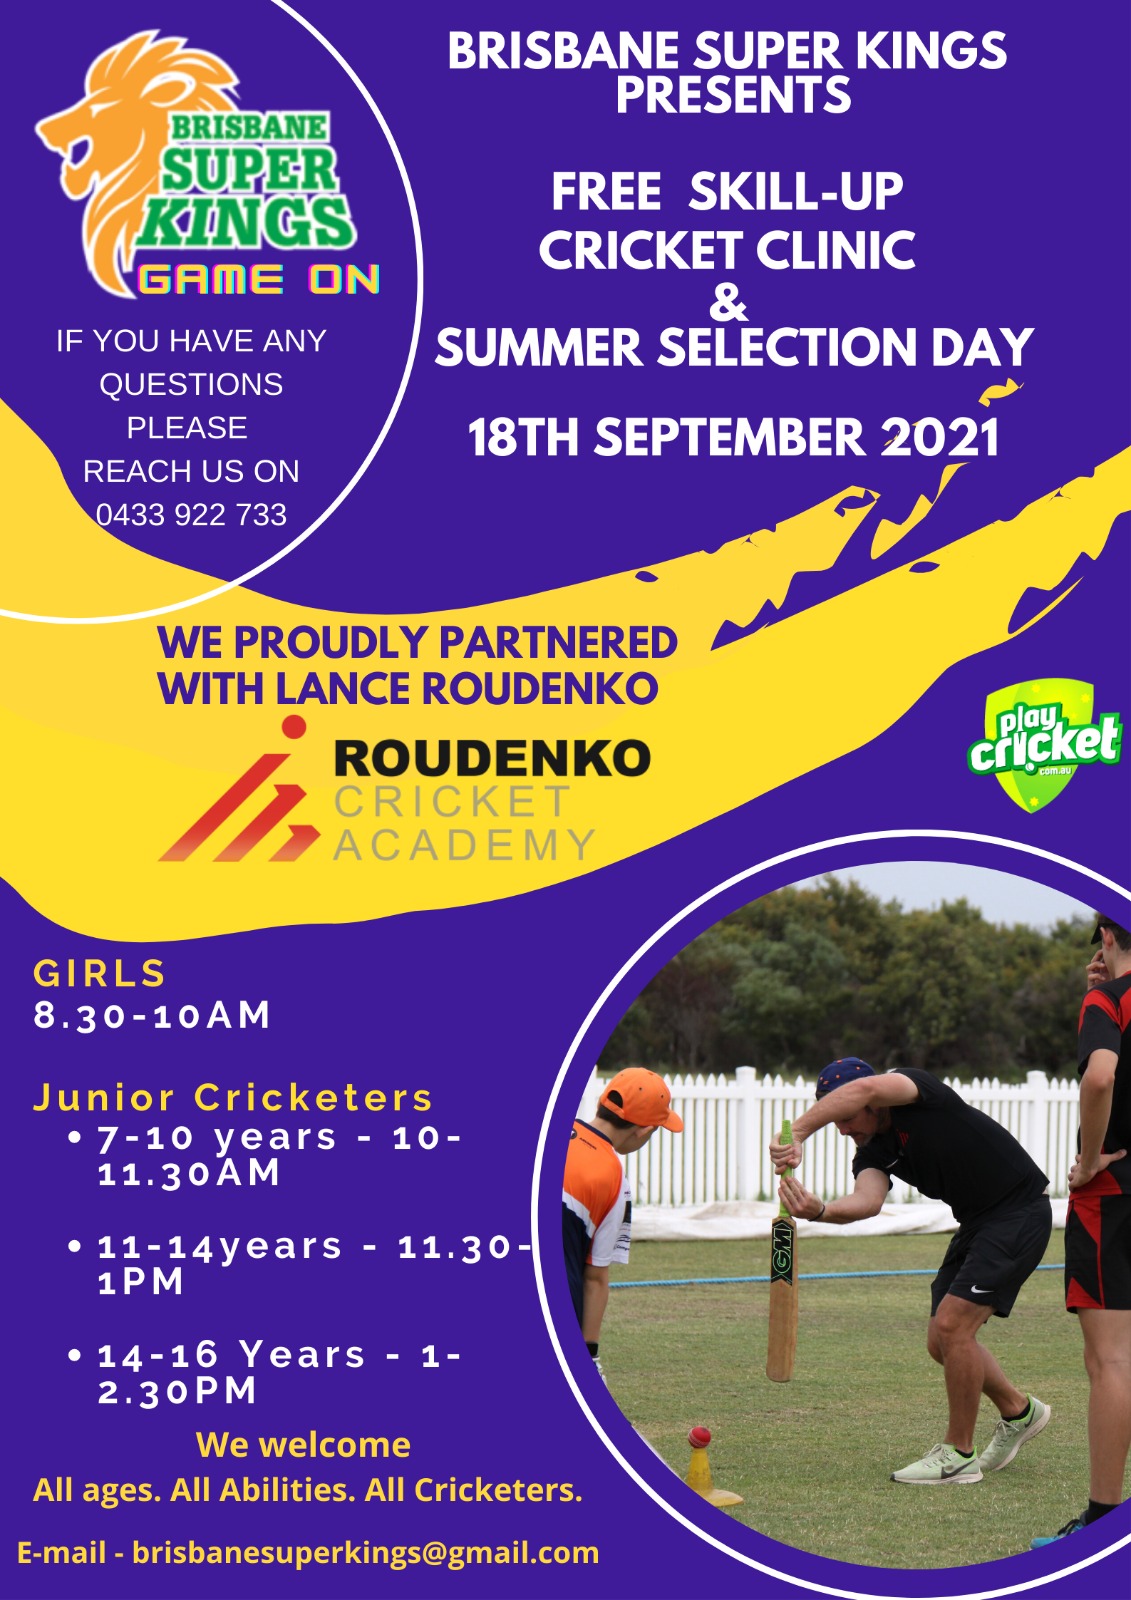 Free Skill Up Cricket Clinic & Summer Selection Day